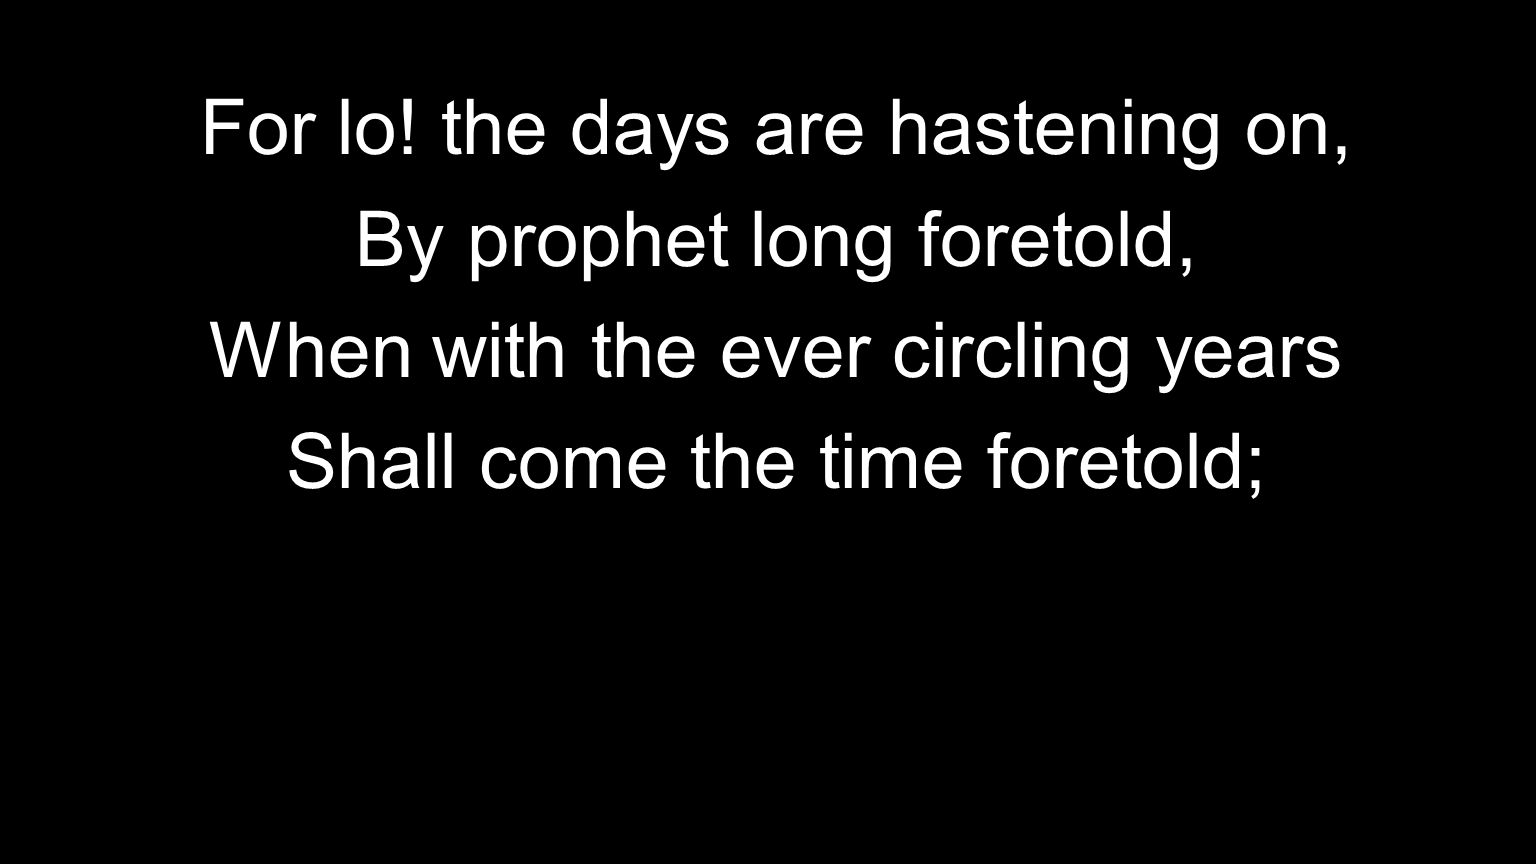 For lo! the days are hastening on, By prophet long foretold,